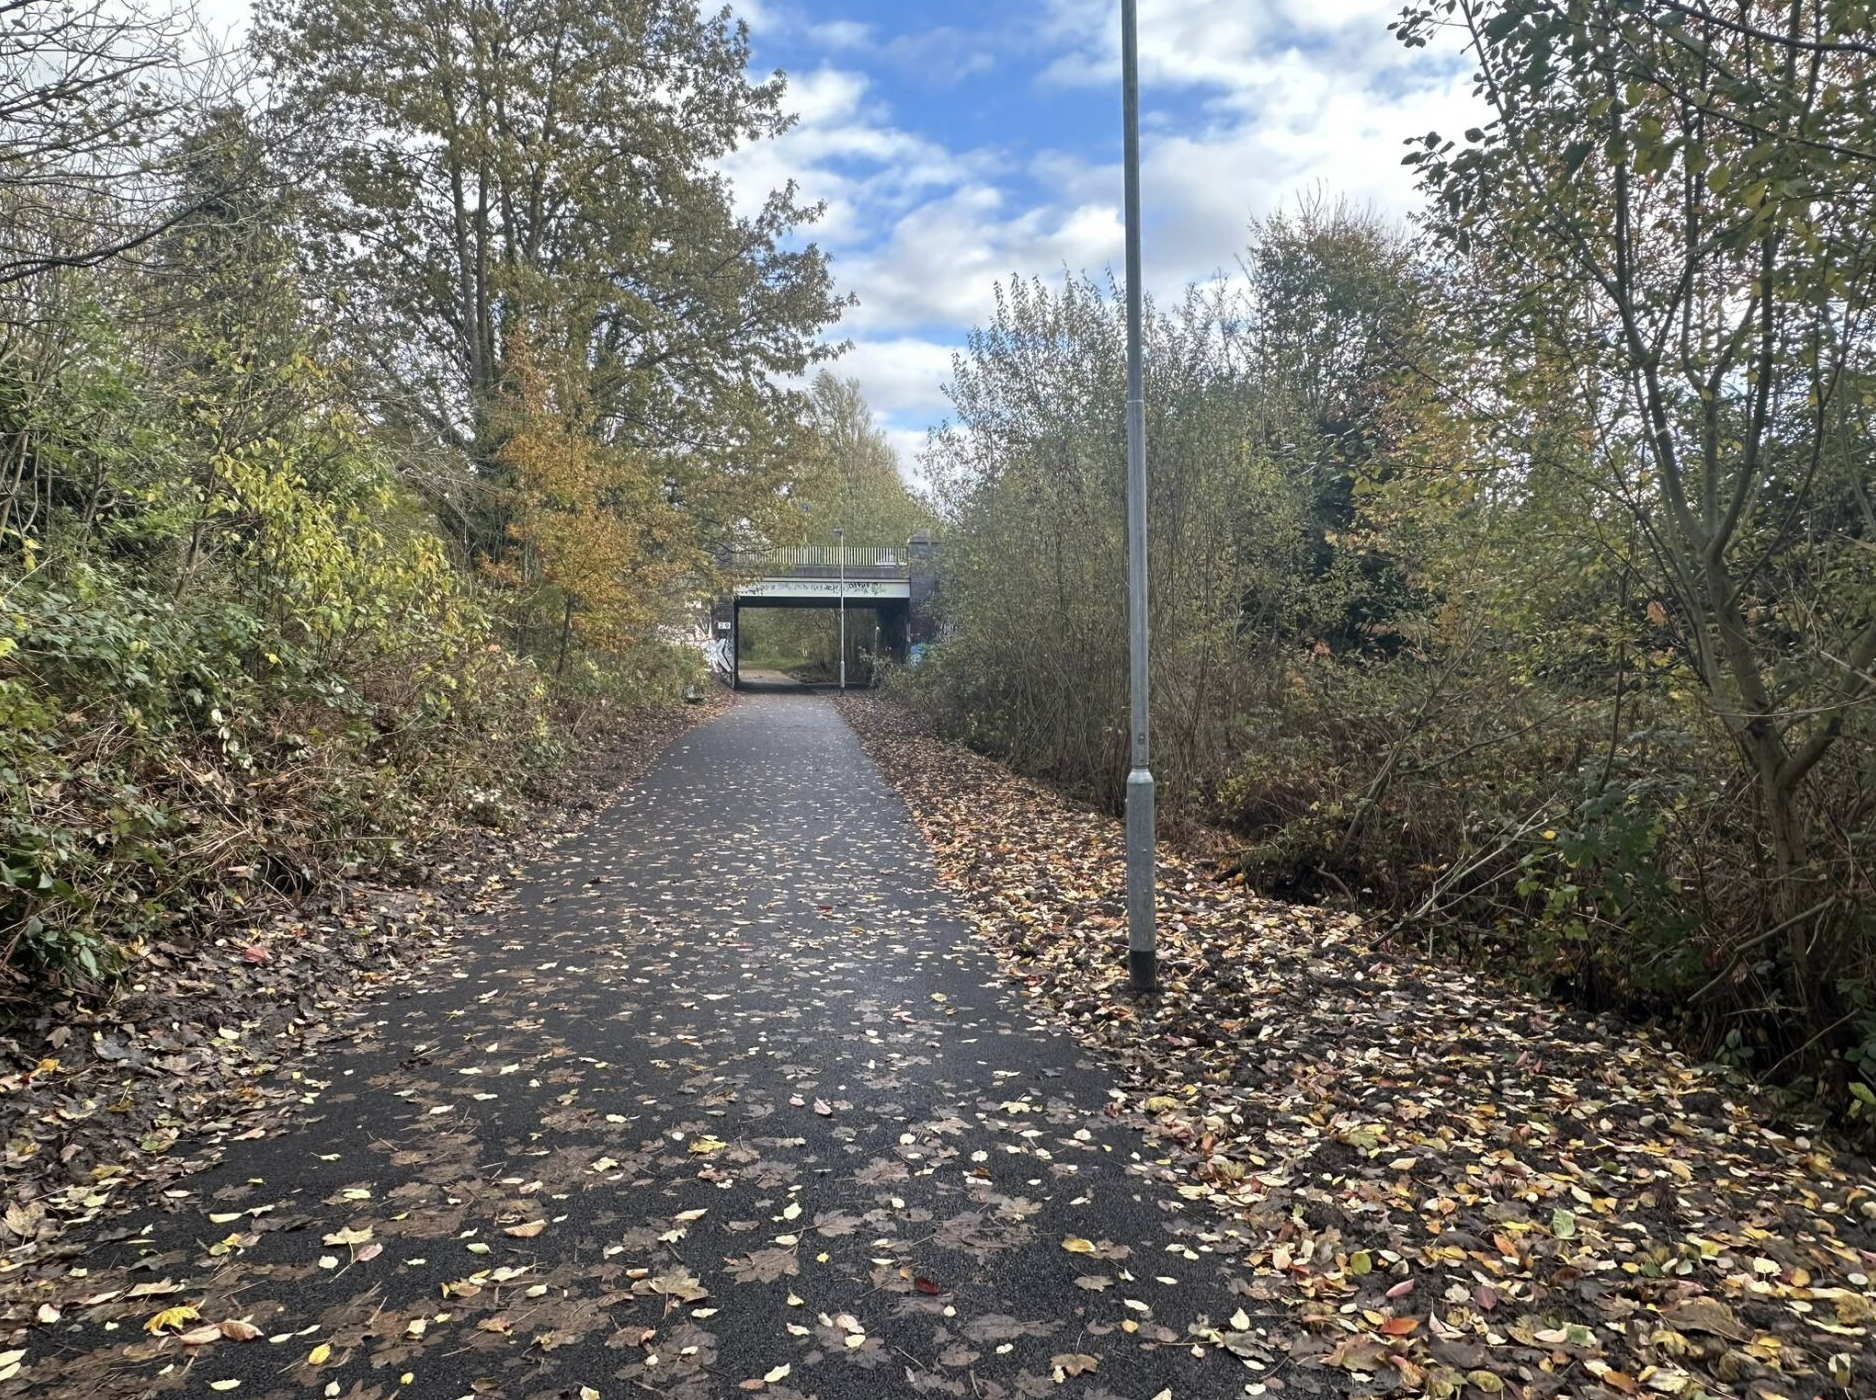 Image of the Fallowfield Loop, which has been freshly paved.